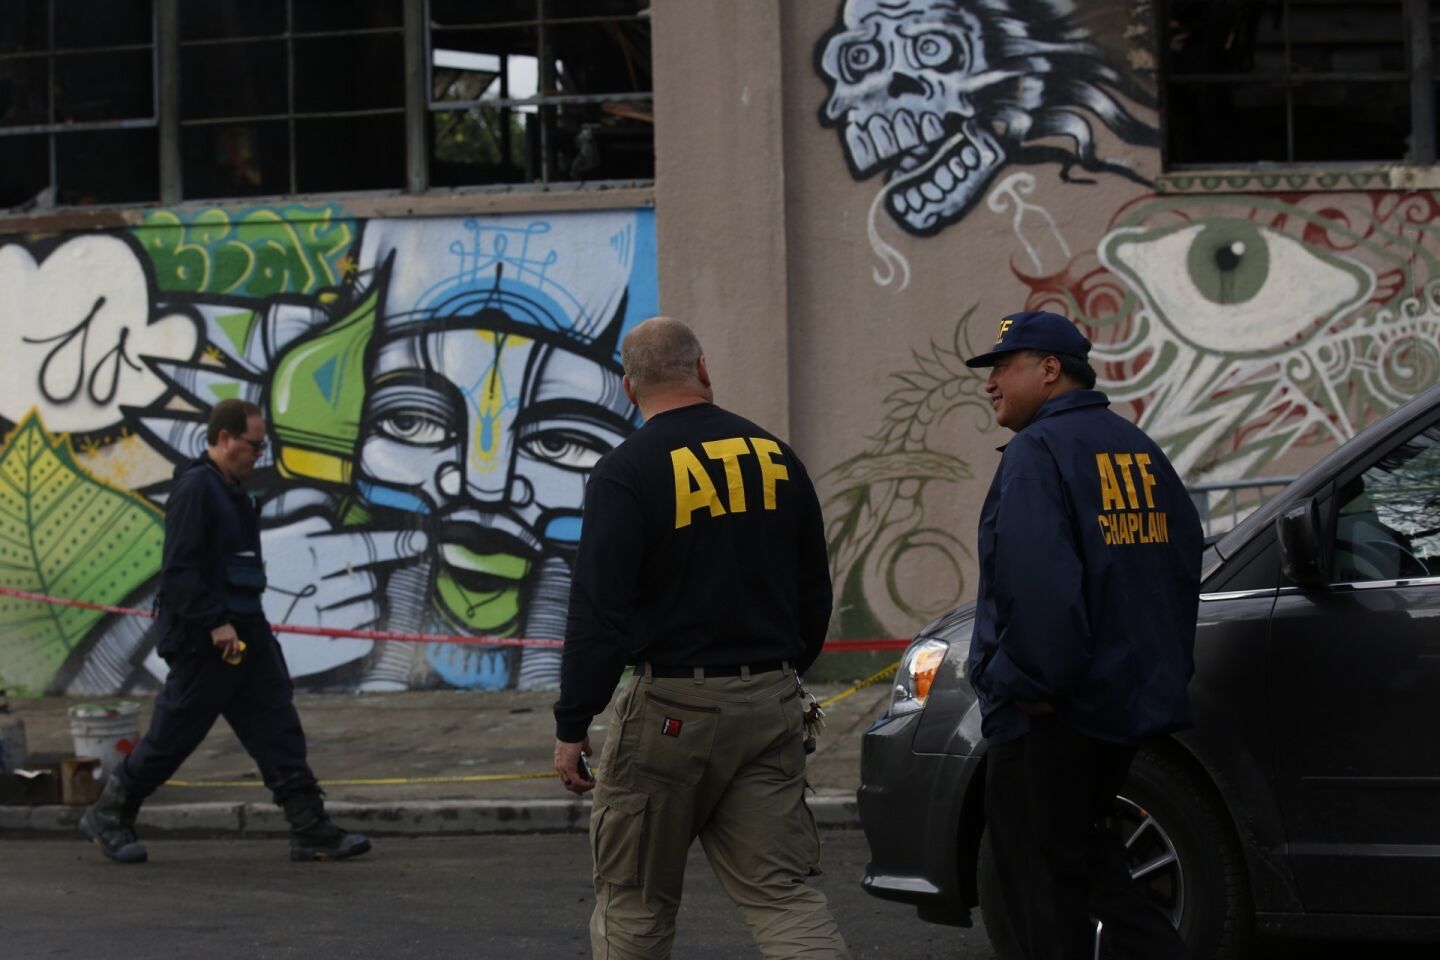 ATF agents map the scene of the fire investigation Friday at the Ghost Ship warehouse in Oakland. (Francine Orr/ Los Angeles Times)